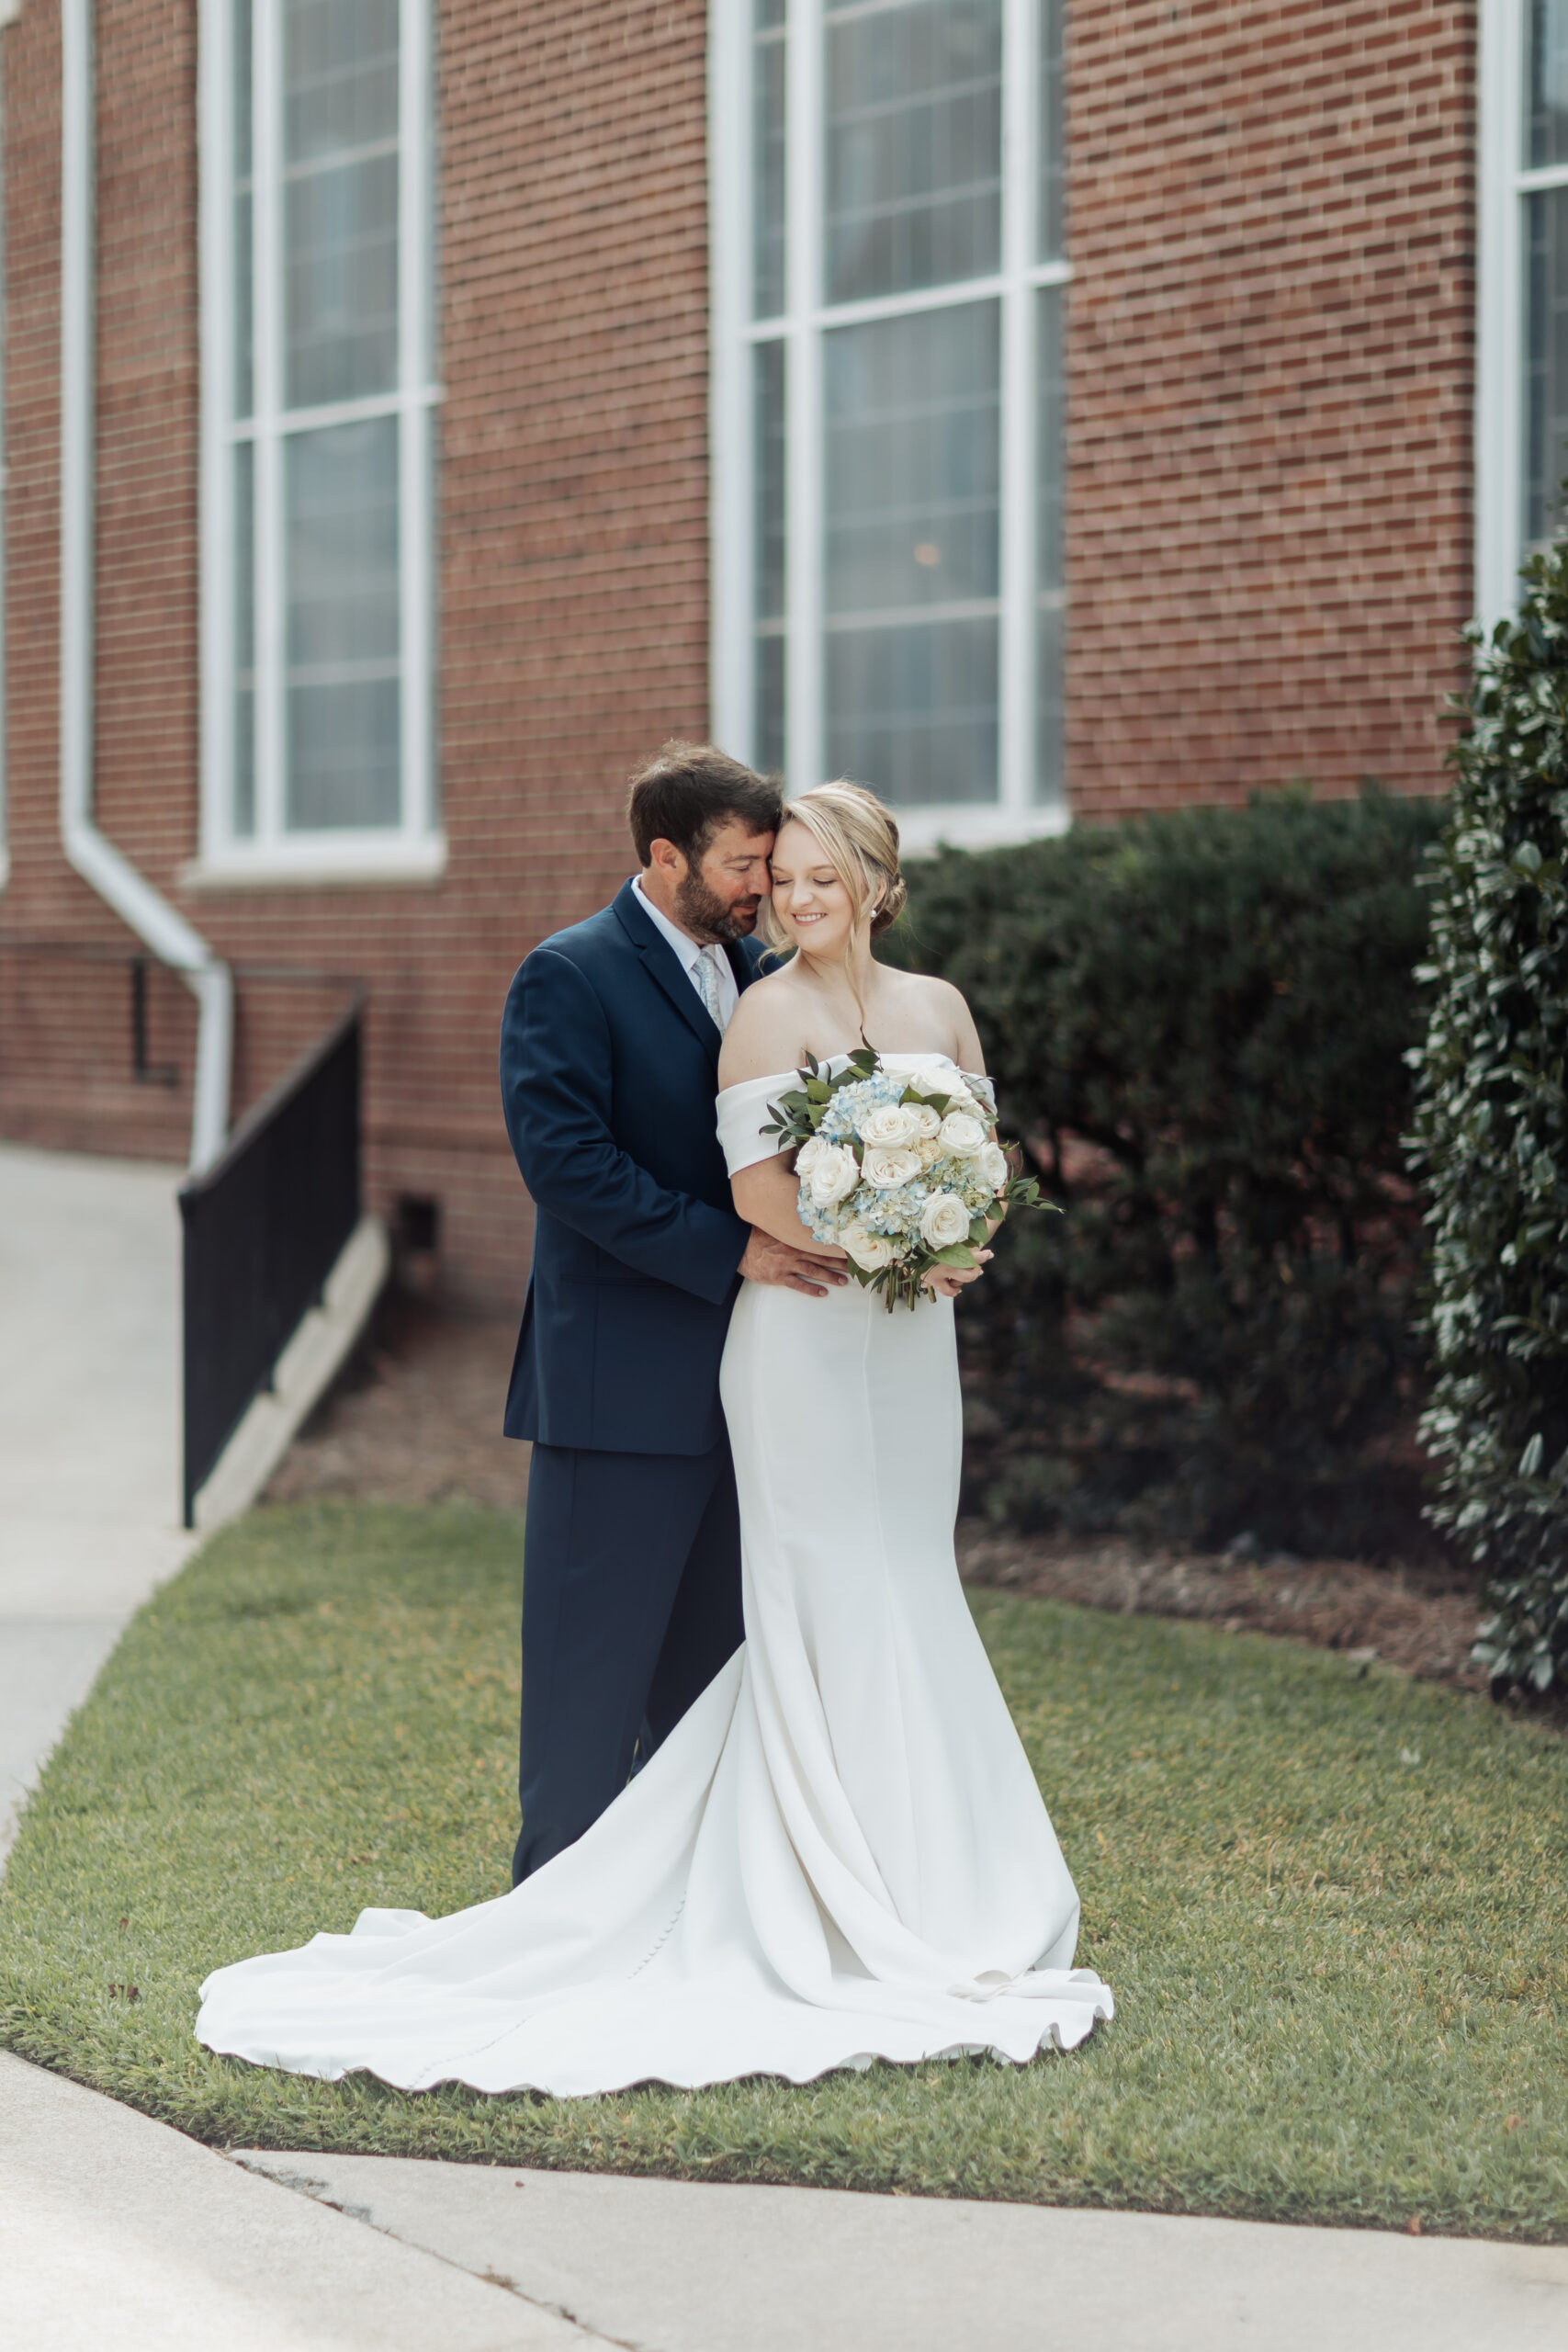 bride holding white flowers stands in front of groom in blue tux and looks back at him over her shoulder. They stand in front of brick church wall.